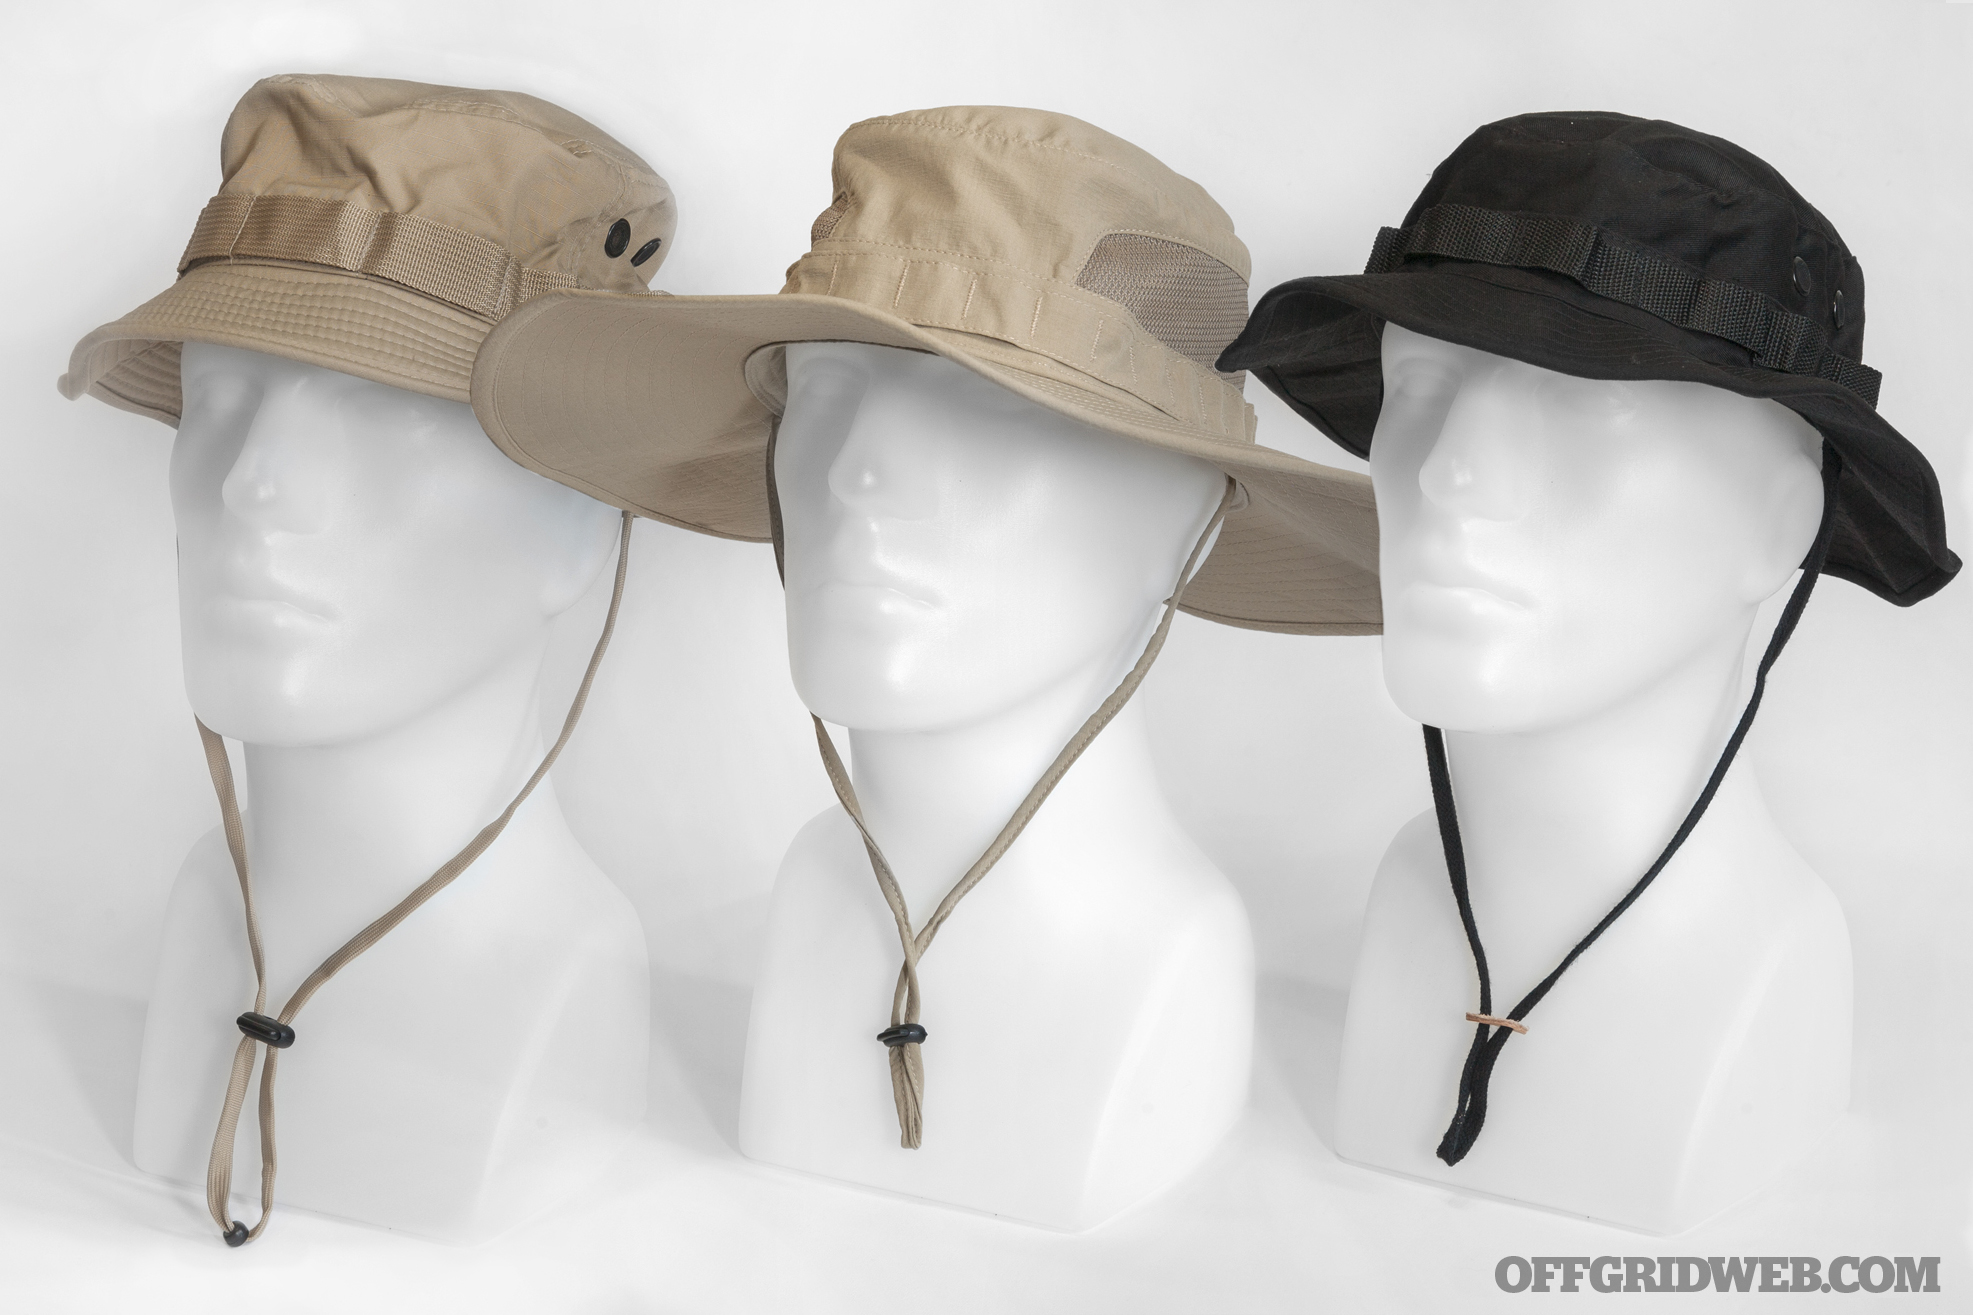 Buyer's Guide: Boonie Hats